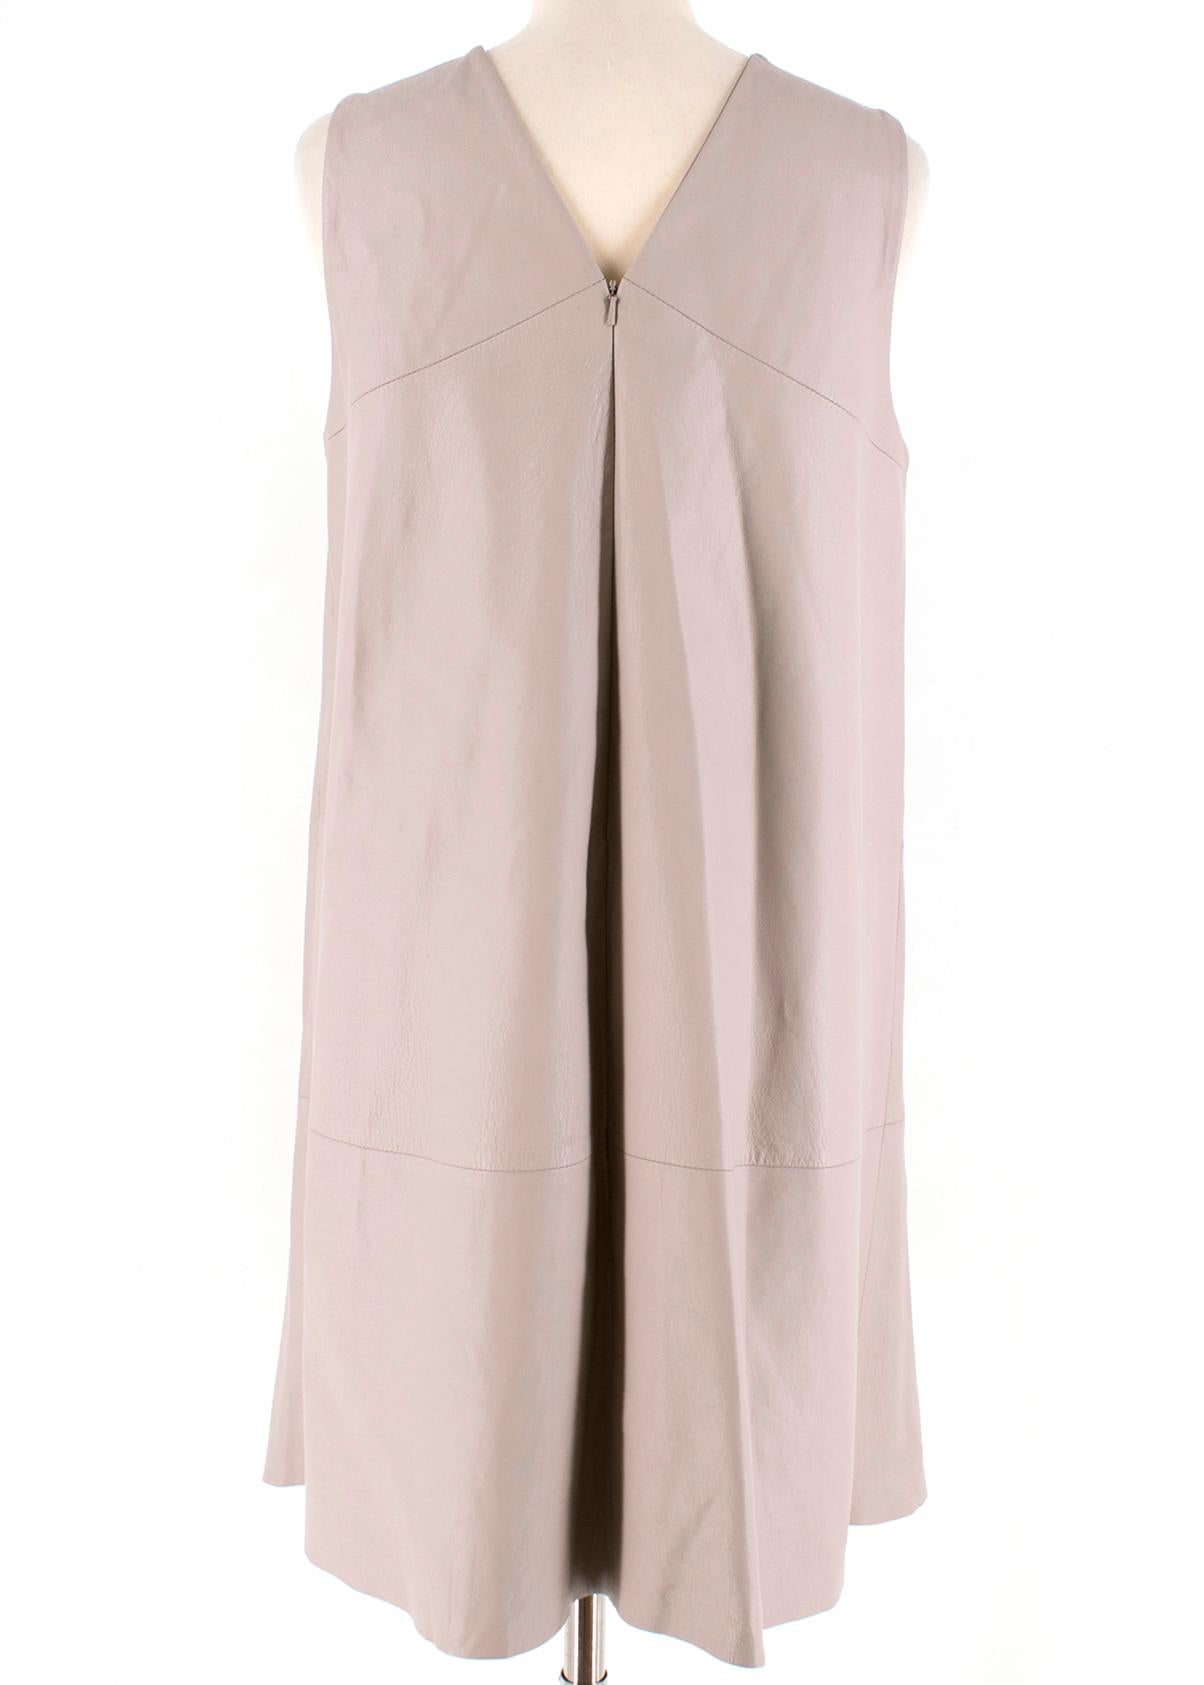 Harrods Taupe Leather Sleeveless Shift Dress featuring a sleeveless design, round neck, concealed zip fastening at back and a short length.

- Lightweight 
- Non-stretchy fabric
- Slightly loose fit 

Composition:
- 100% leather

Care:
- Specialists